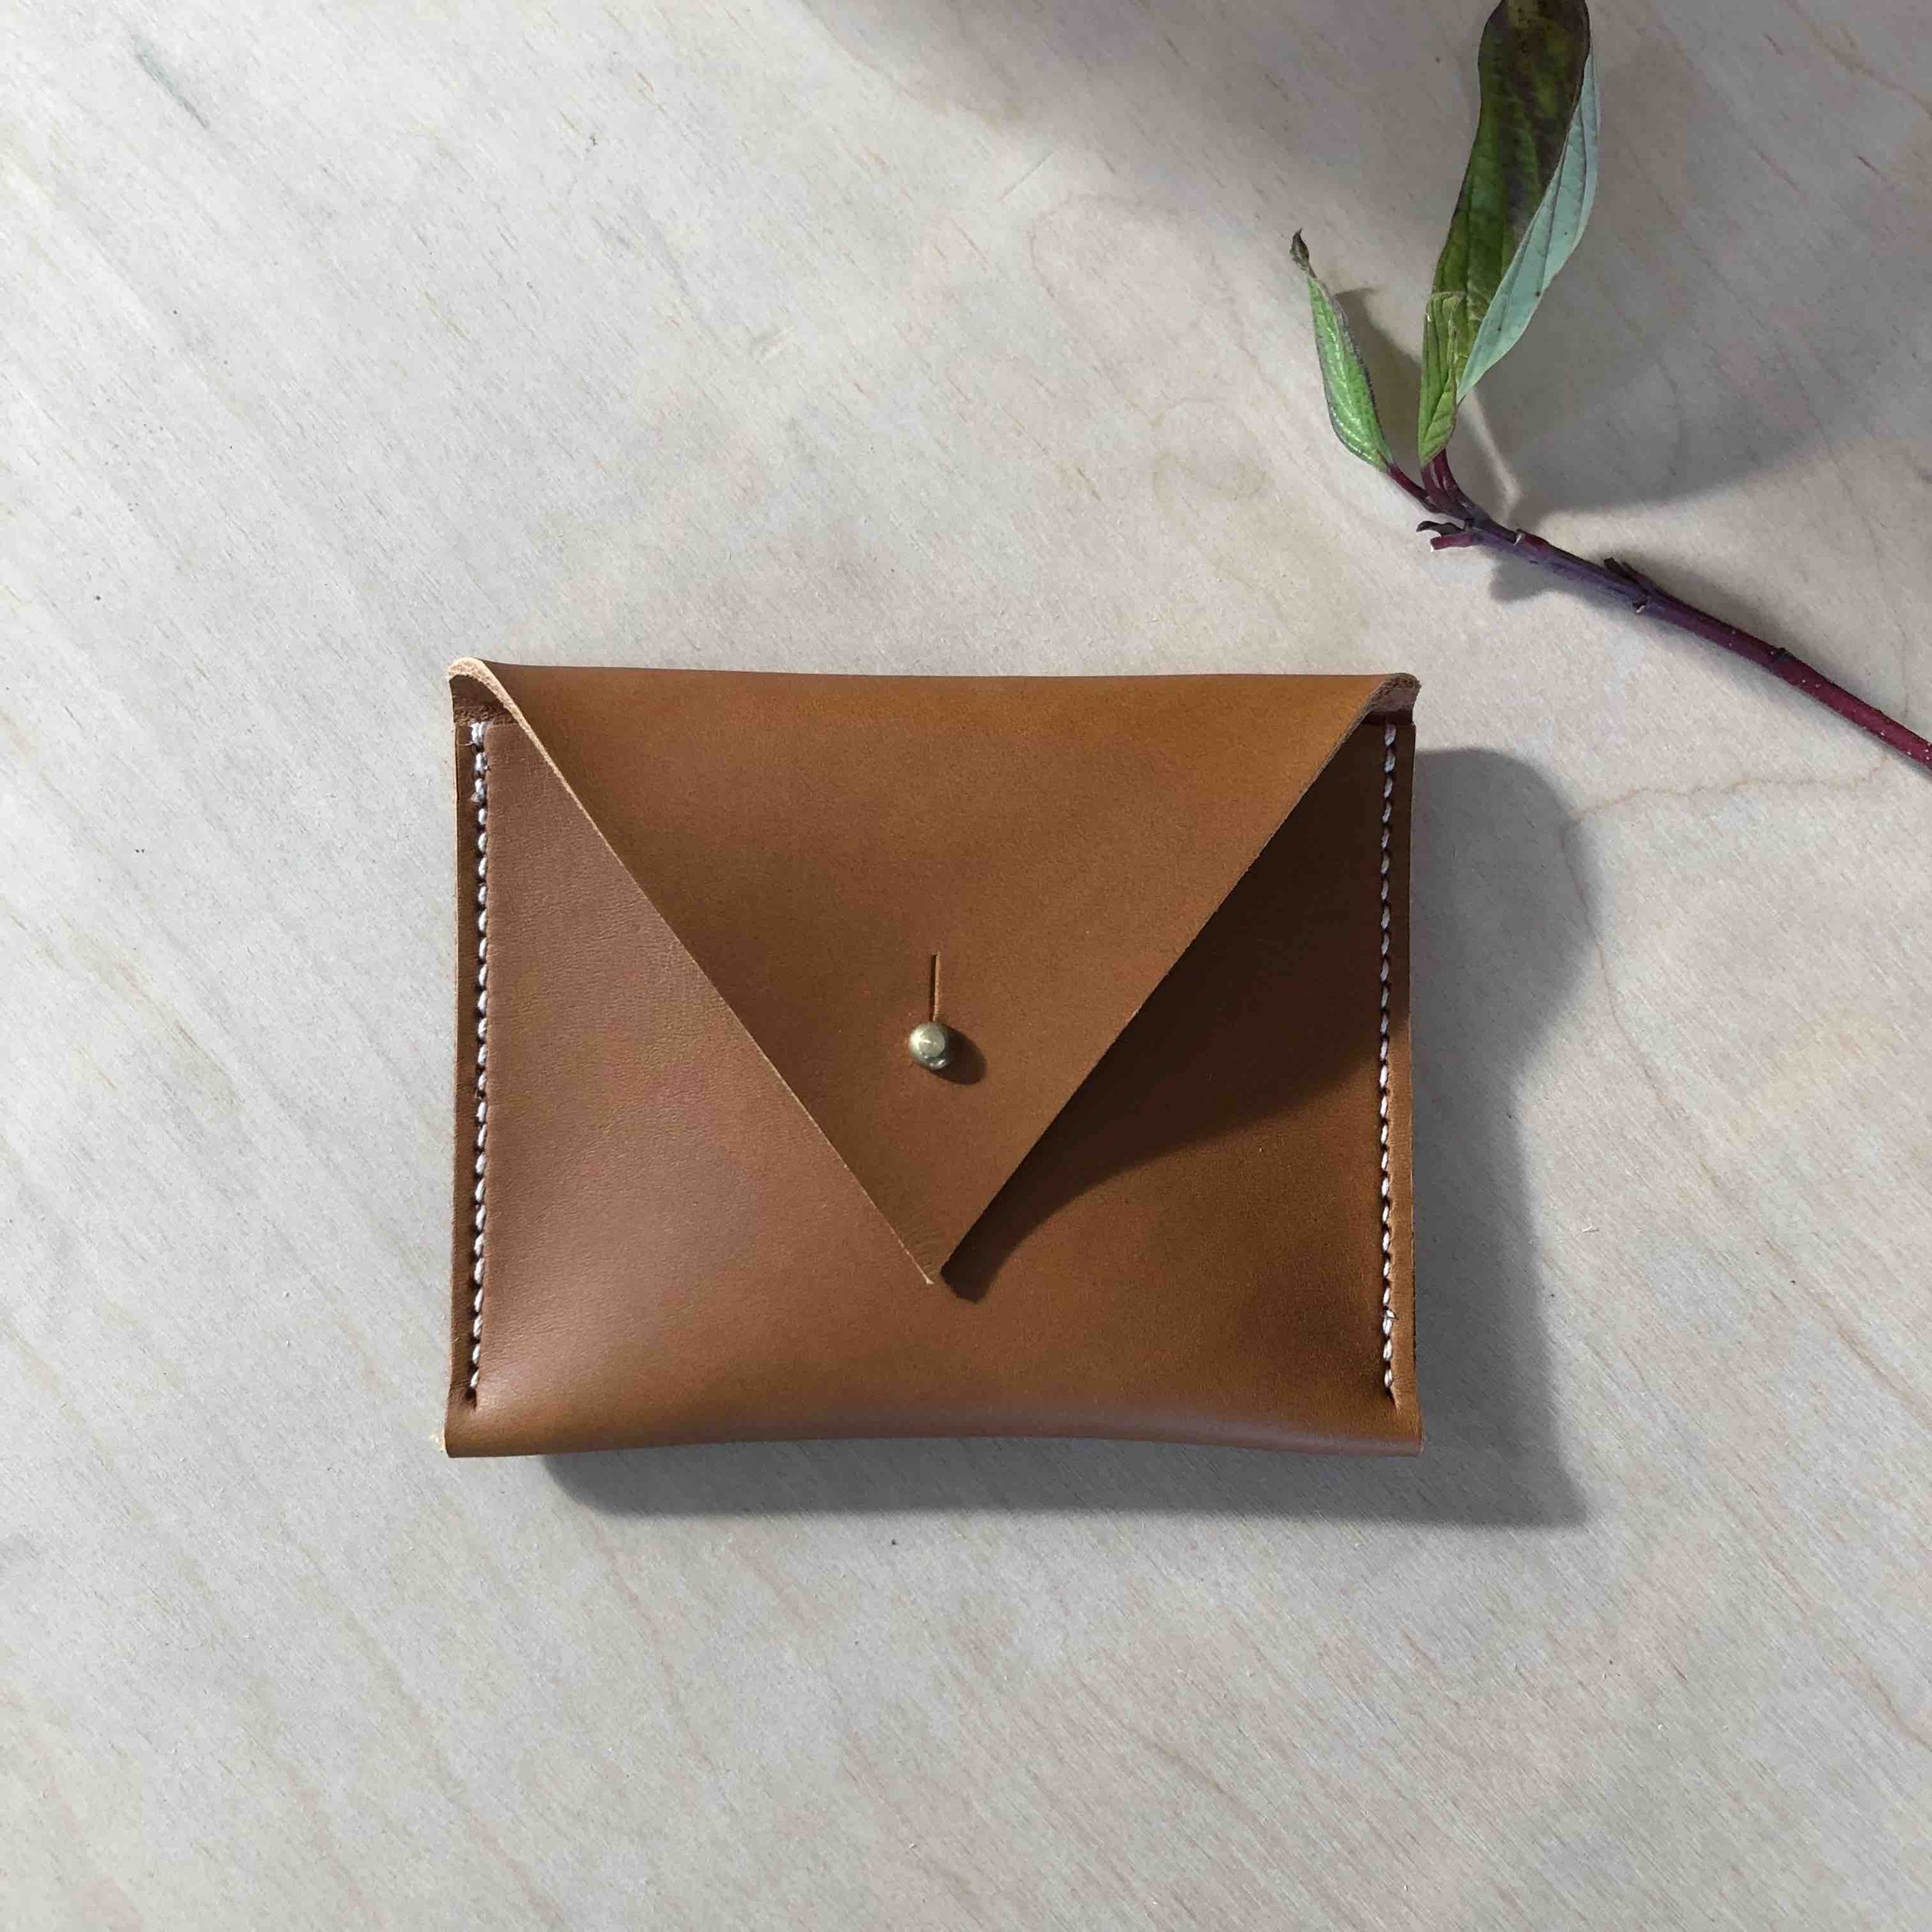 CARV sustainable leather coin purse handmade in the UK.